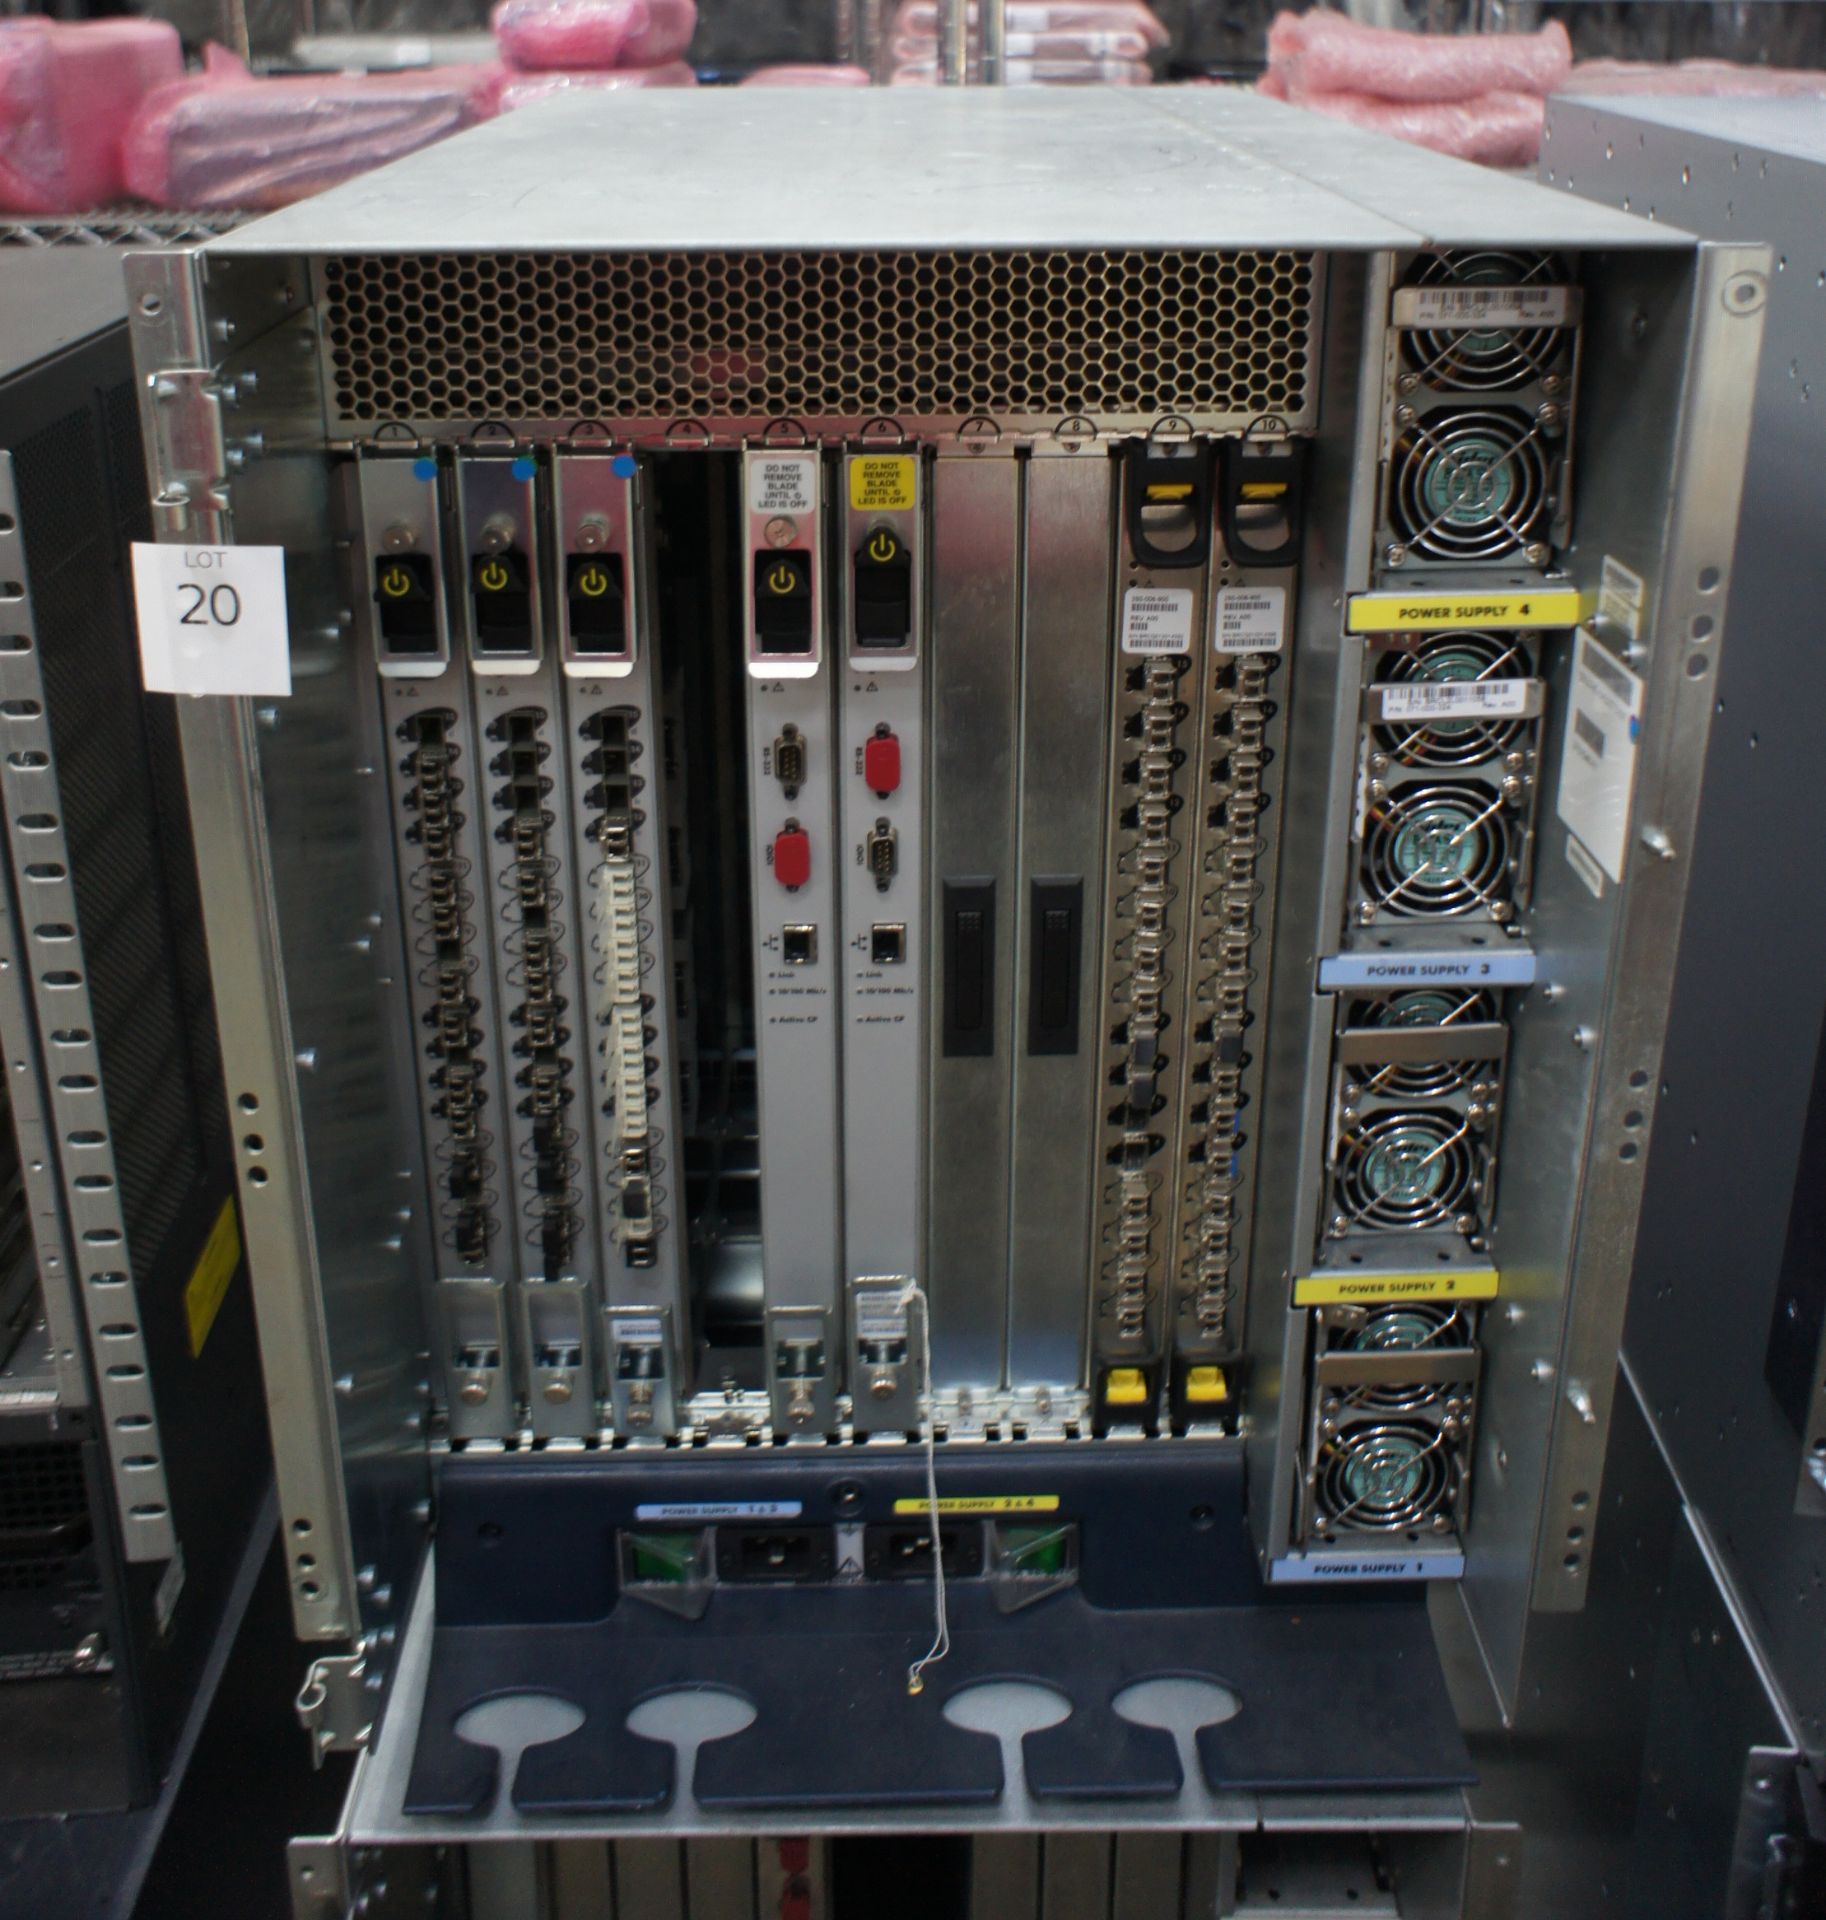 IBM2109-M48 SAN256 director cabinet with 8x FC4/32 cards and 1x CP4 cards, IBM2109-M48 SAN256 - Image 32 of 35